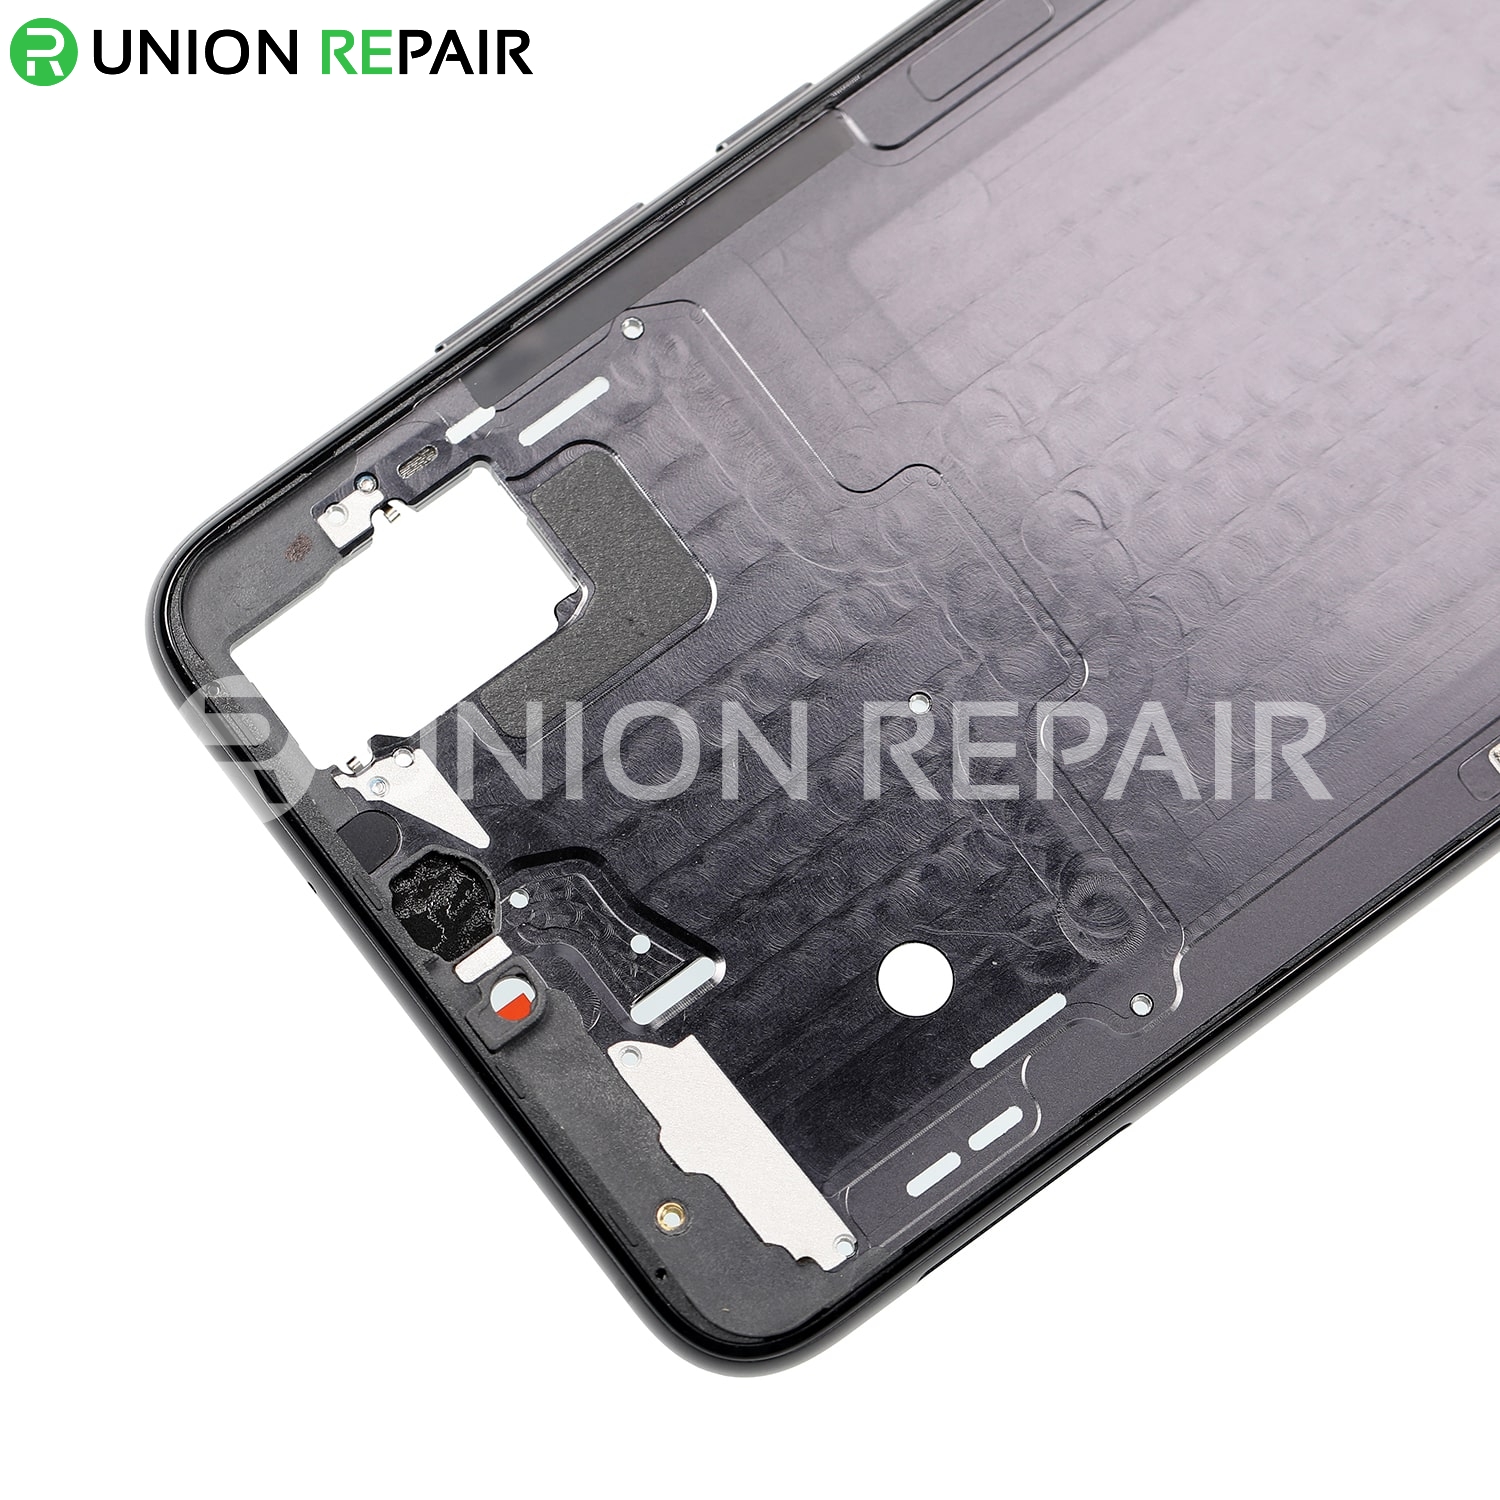 Replacement for Huawei P20 Front Housing LCD Frame Bezel Plate - Black